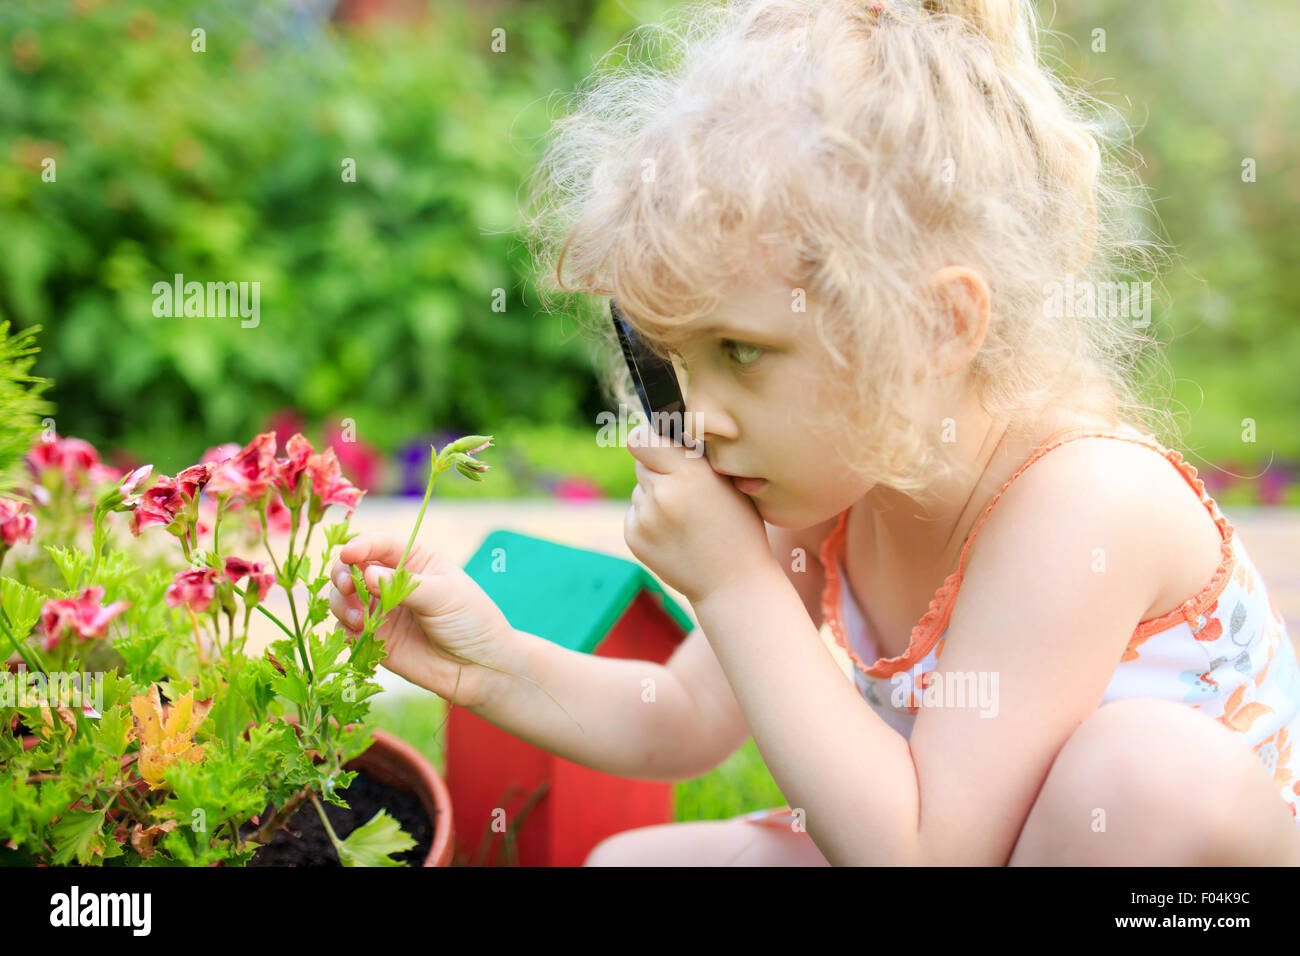 Little girl exploring nature with a magnifying glass Stock Photo